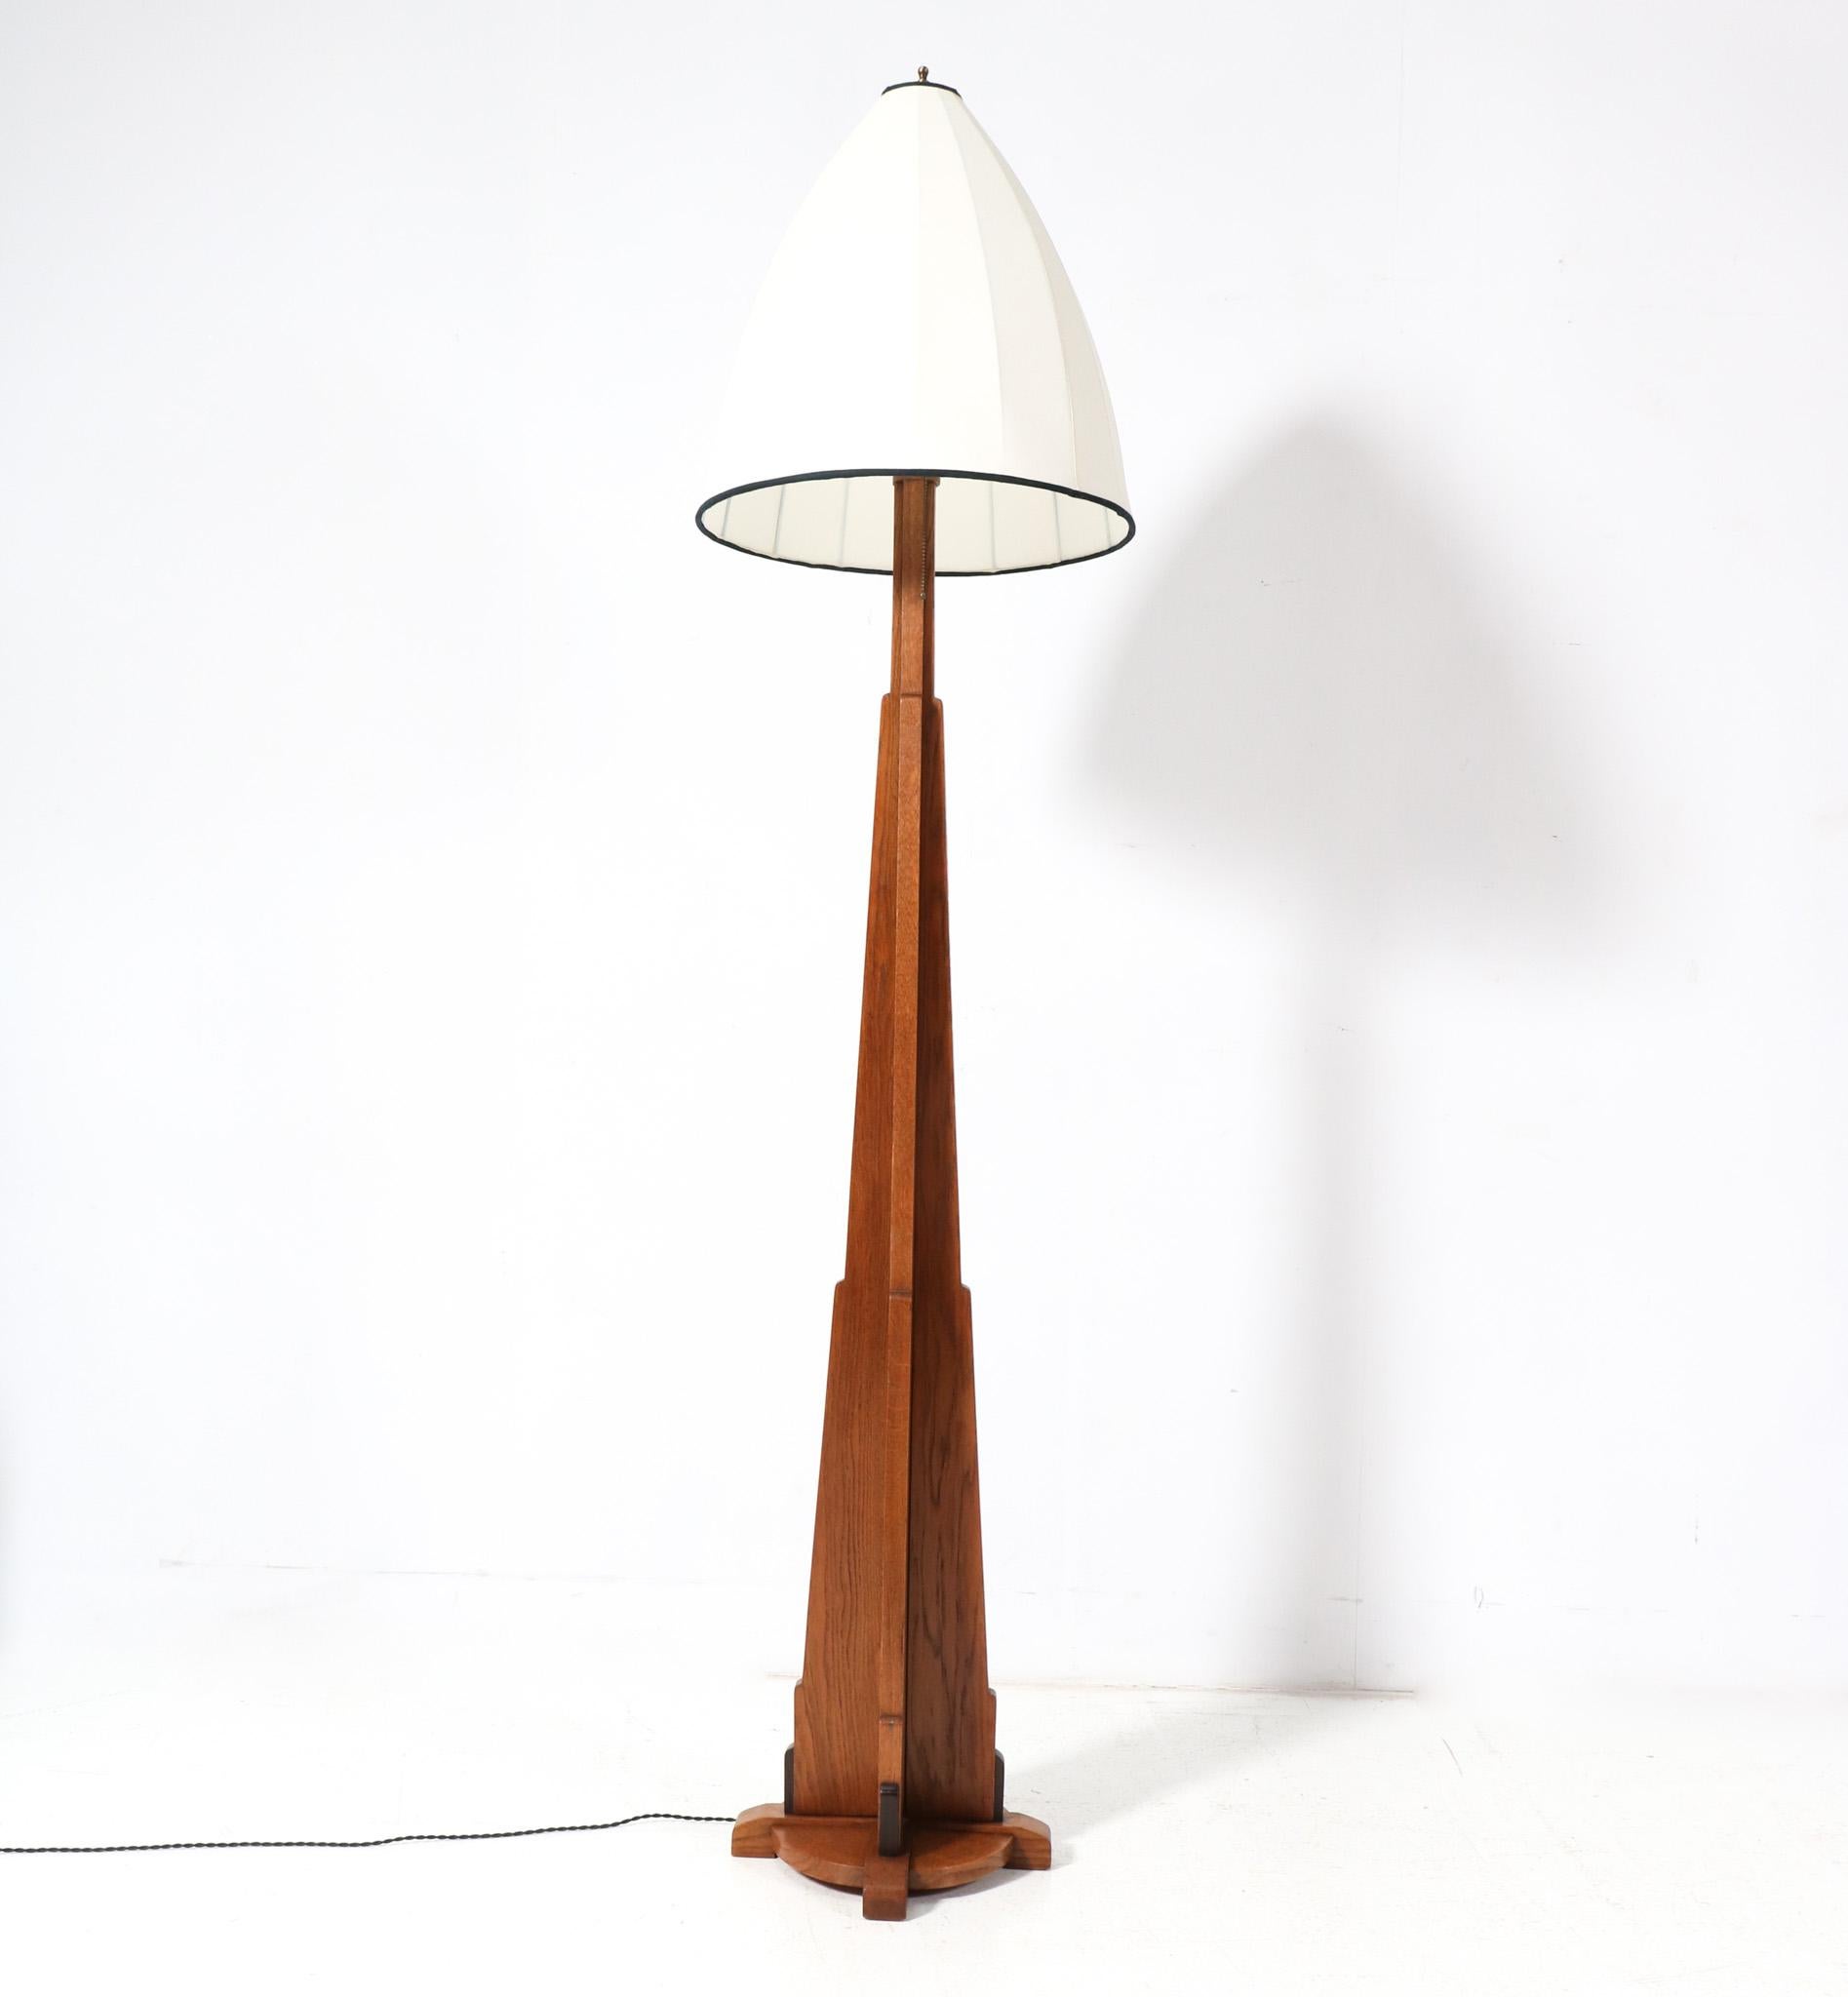 Magnificent and rare Art Deco Amsterdamse School floor lamp.
Striking Dutch design from the 1920s
Solid oak base with solid macassar ebony decorative elements.
The original shade has been re-upholstered with a yellow Shantung silk and the inside